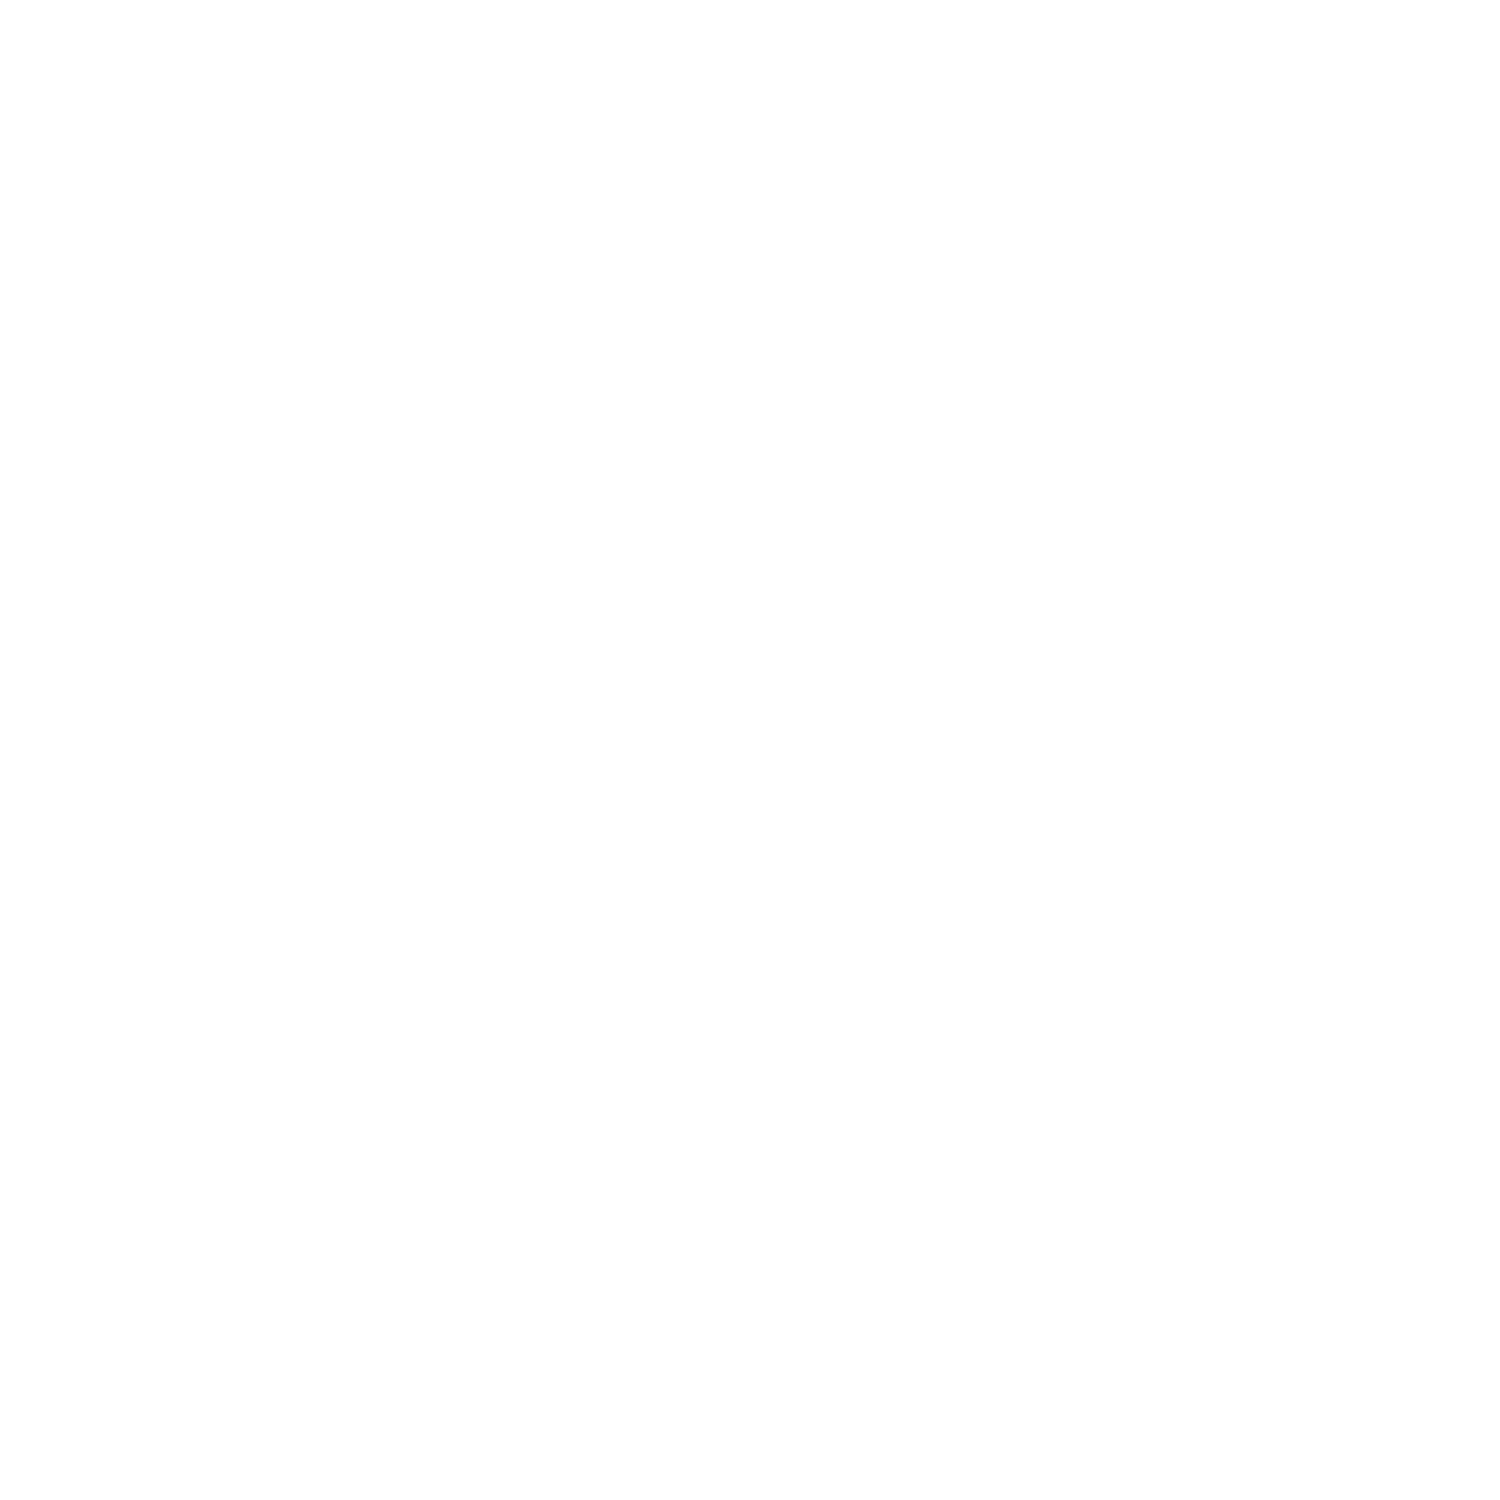 Full Barrel Cooperative Brewery & Taproom